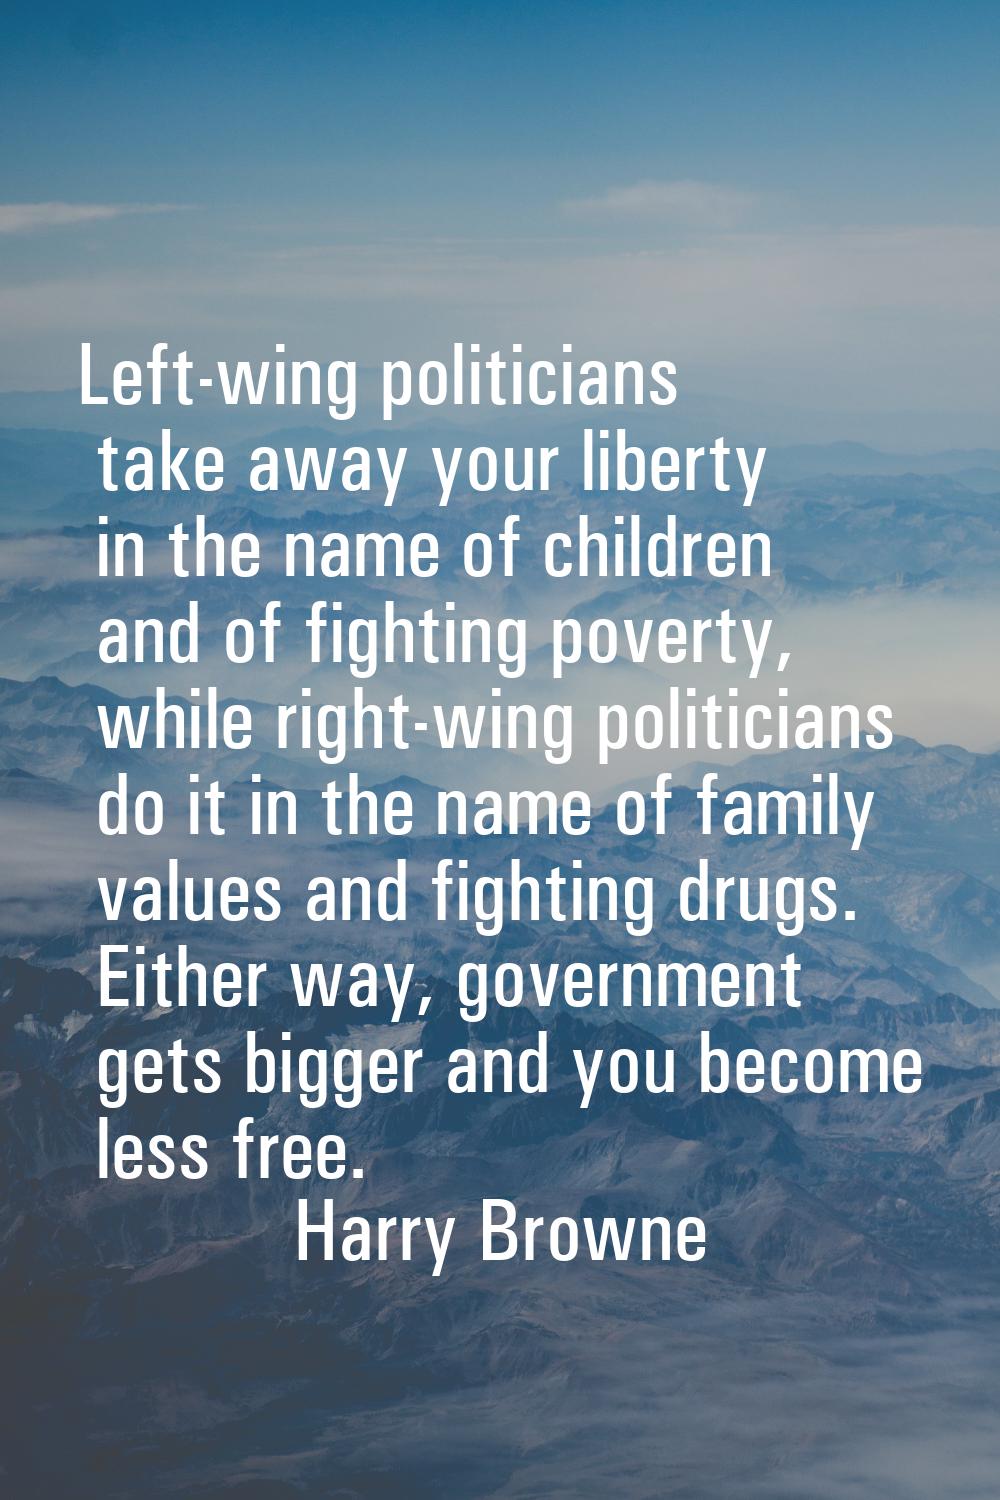 Left-wing politicians take away your liberty in the name of children and of fighting poverty, while